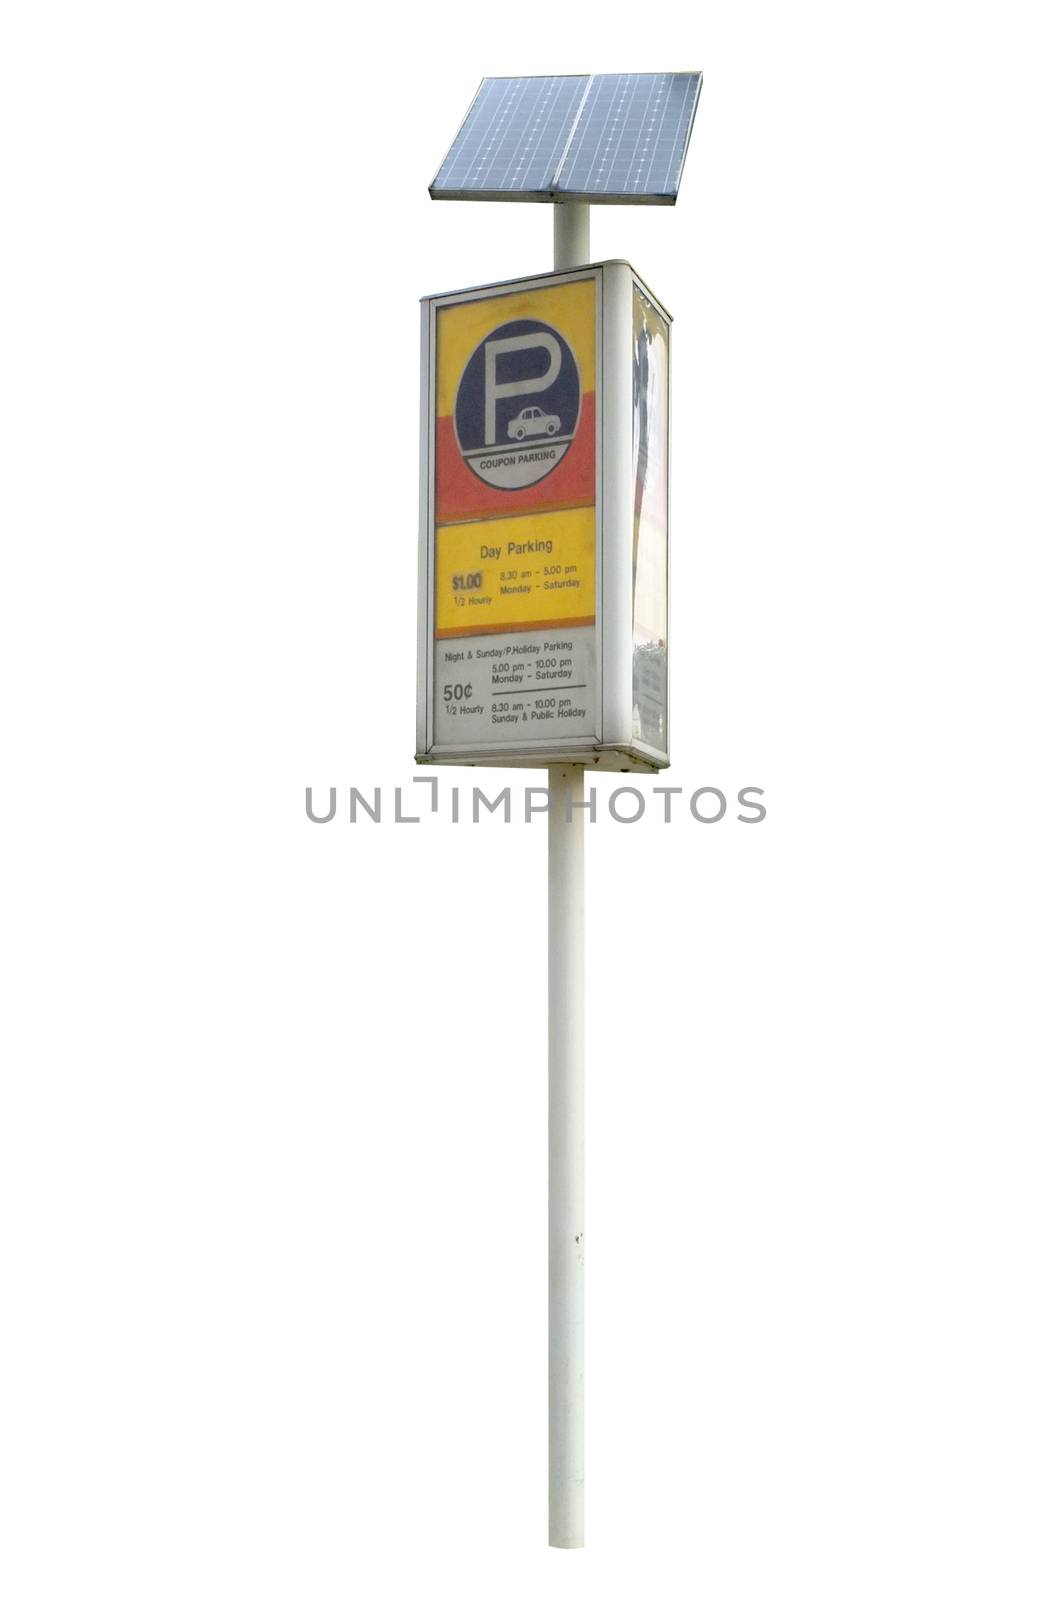 Parking lot ticket traffic sign with solar cell